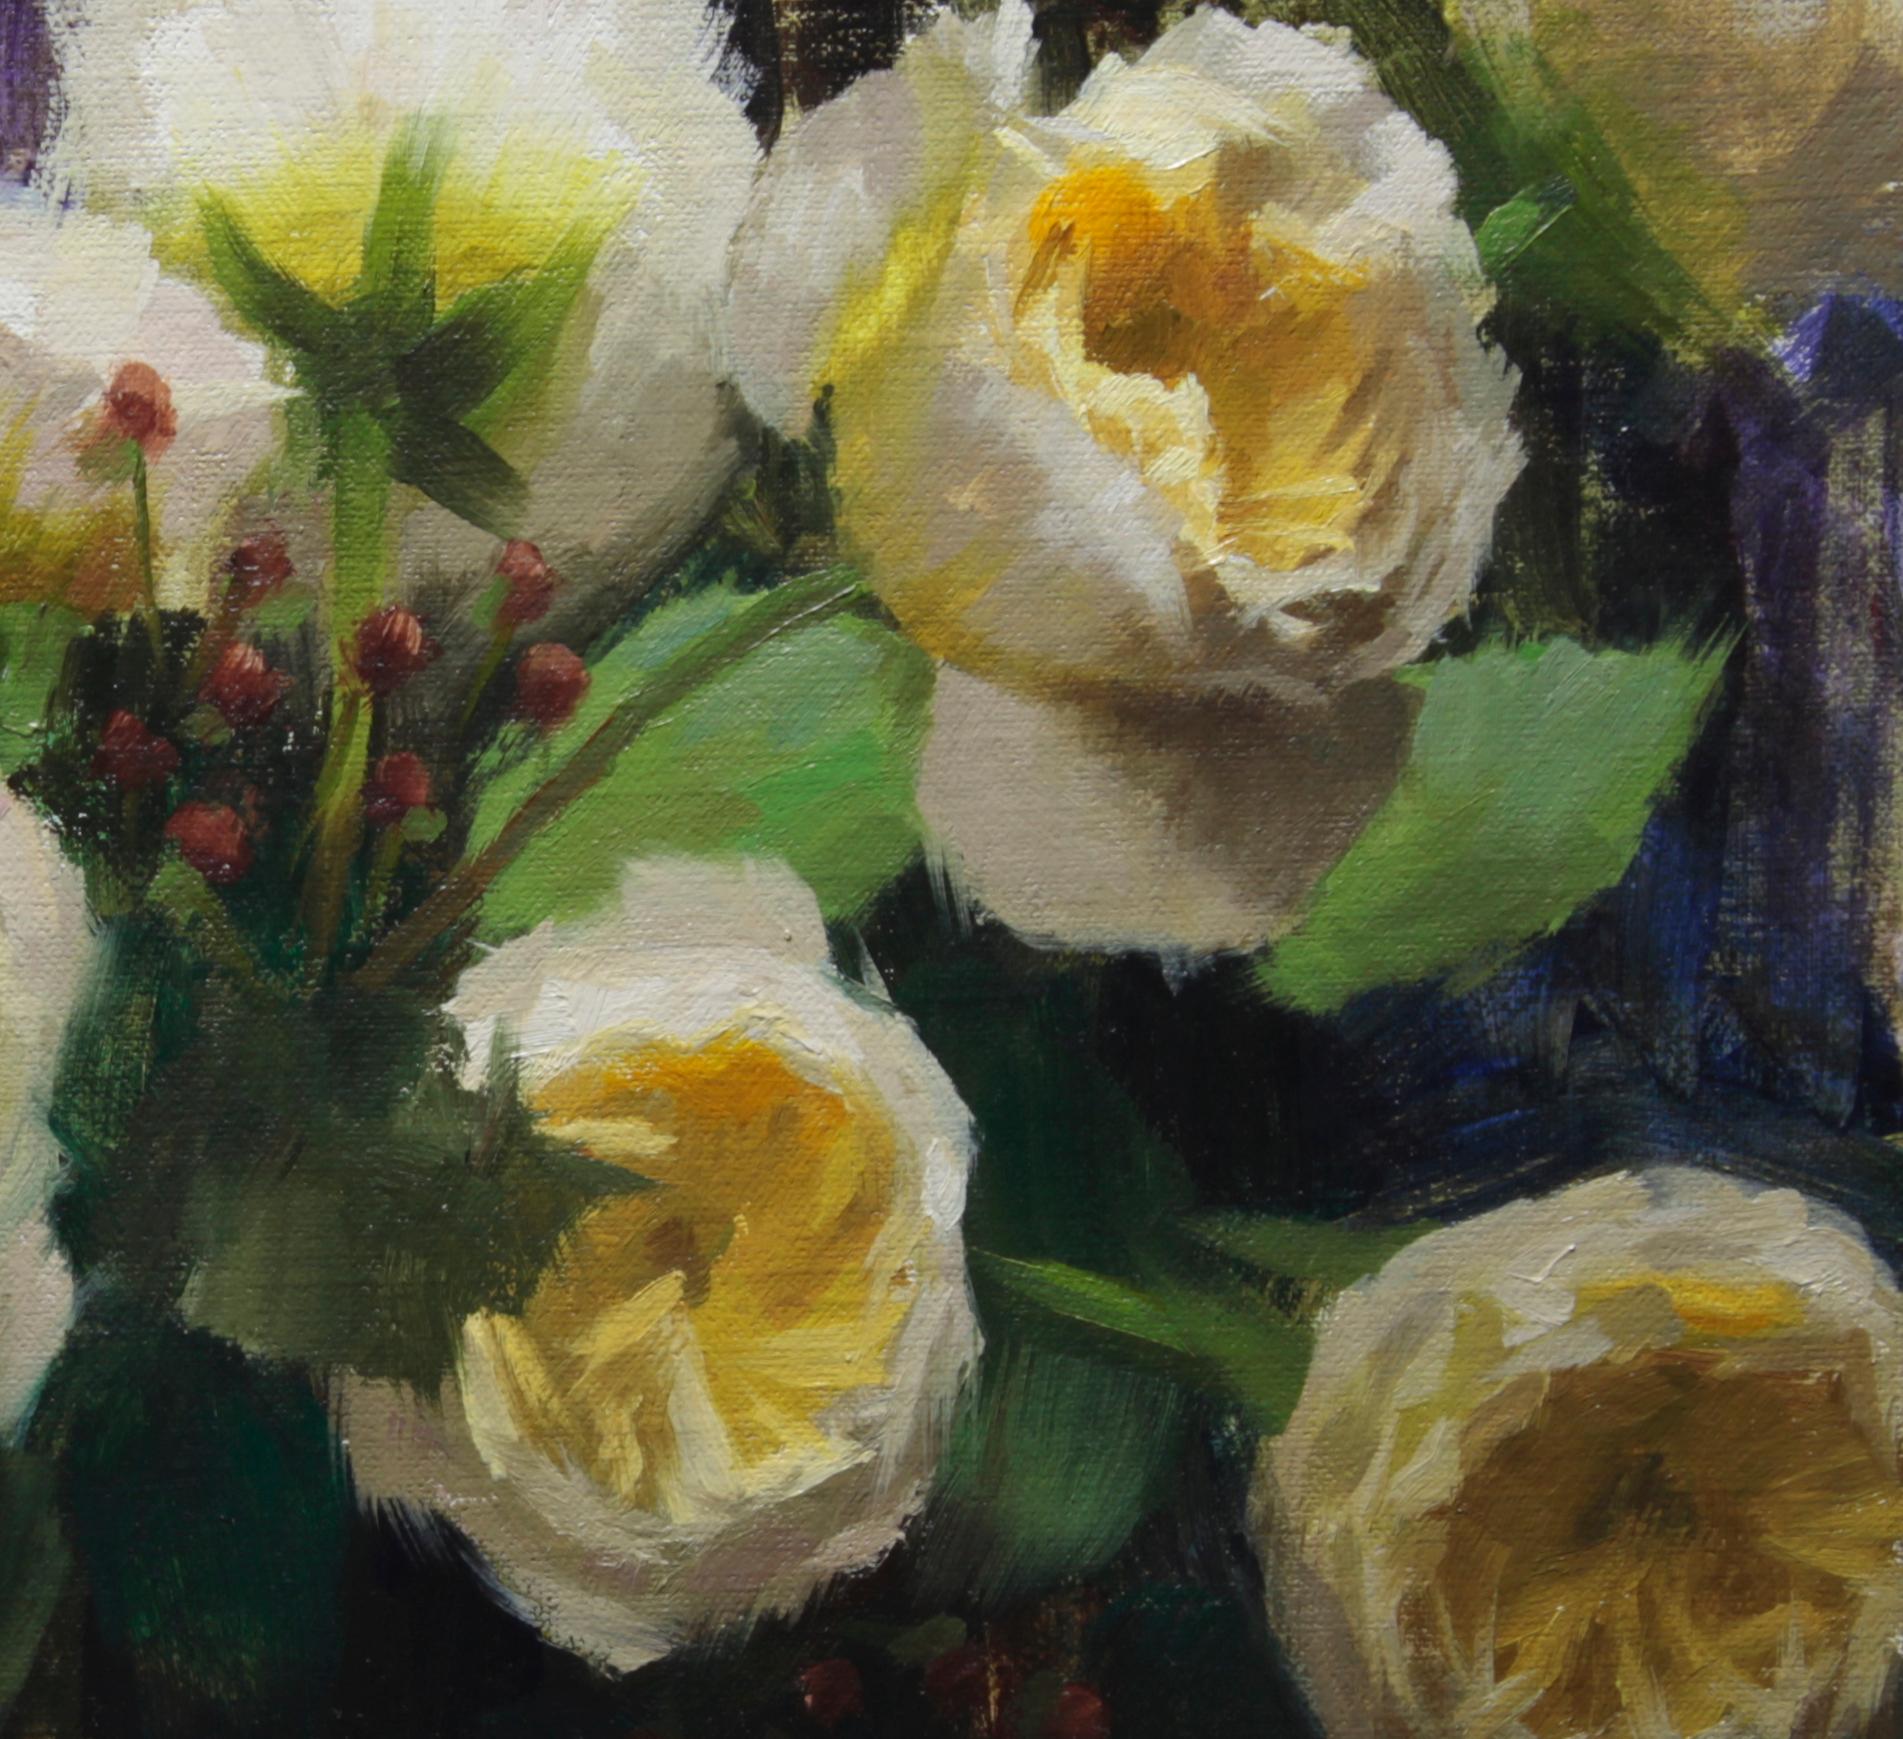 Garden of Roses is a Floral Painting, in the style of Representational Oil Painting. The artist was selected in 2015 as one of the top 21 under 31  Young Artists to watch in Southwest Art Magazine..

Artist Zac Elletson works primarily with oil,